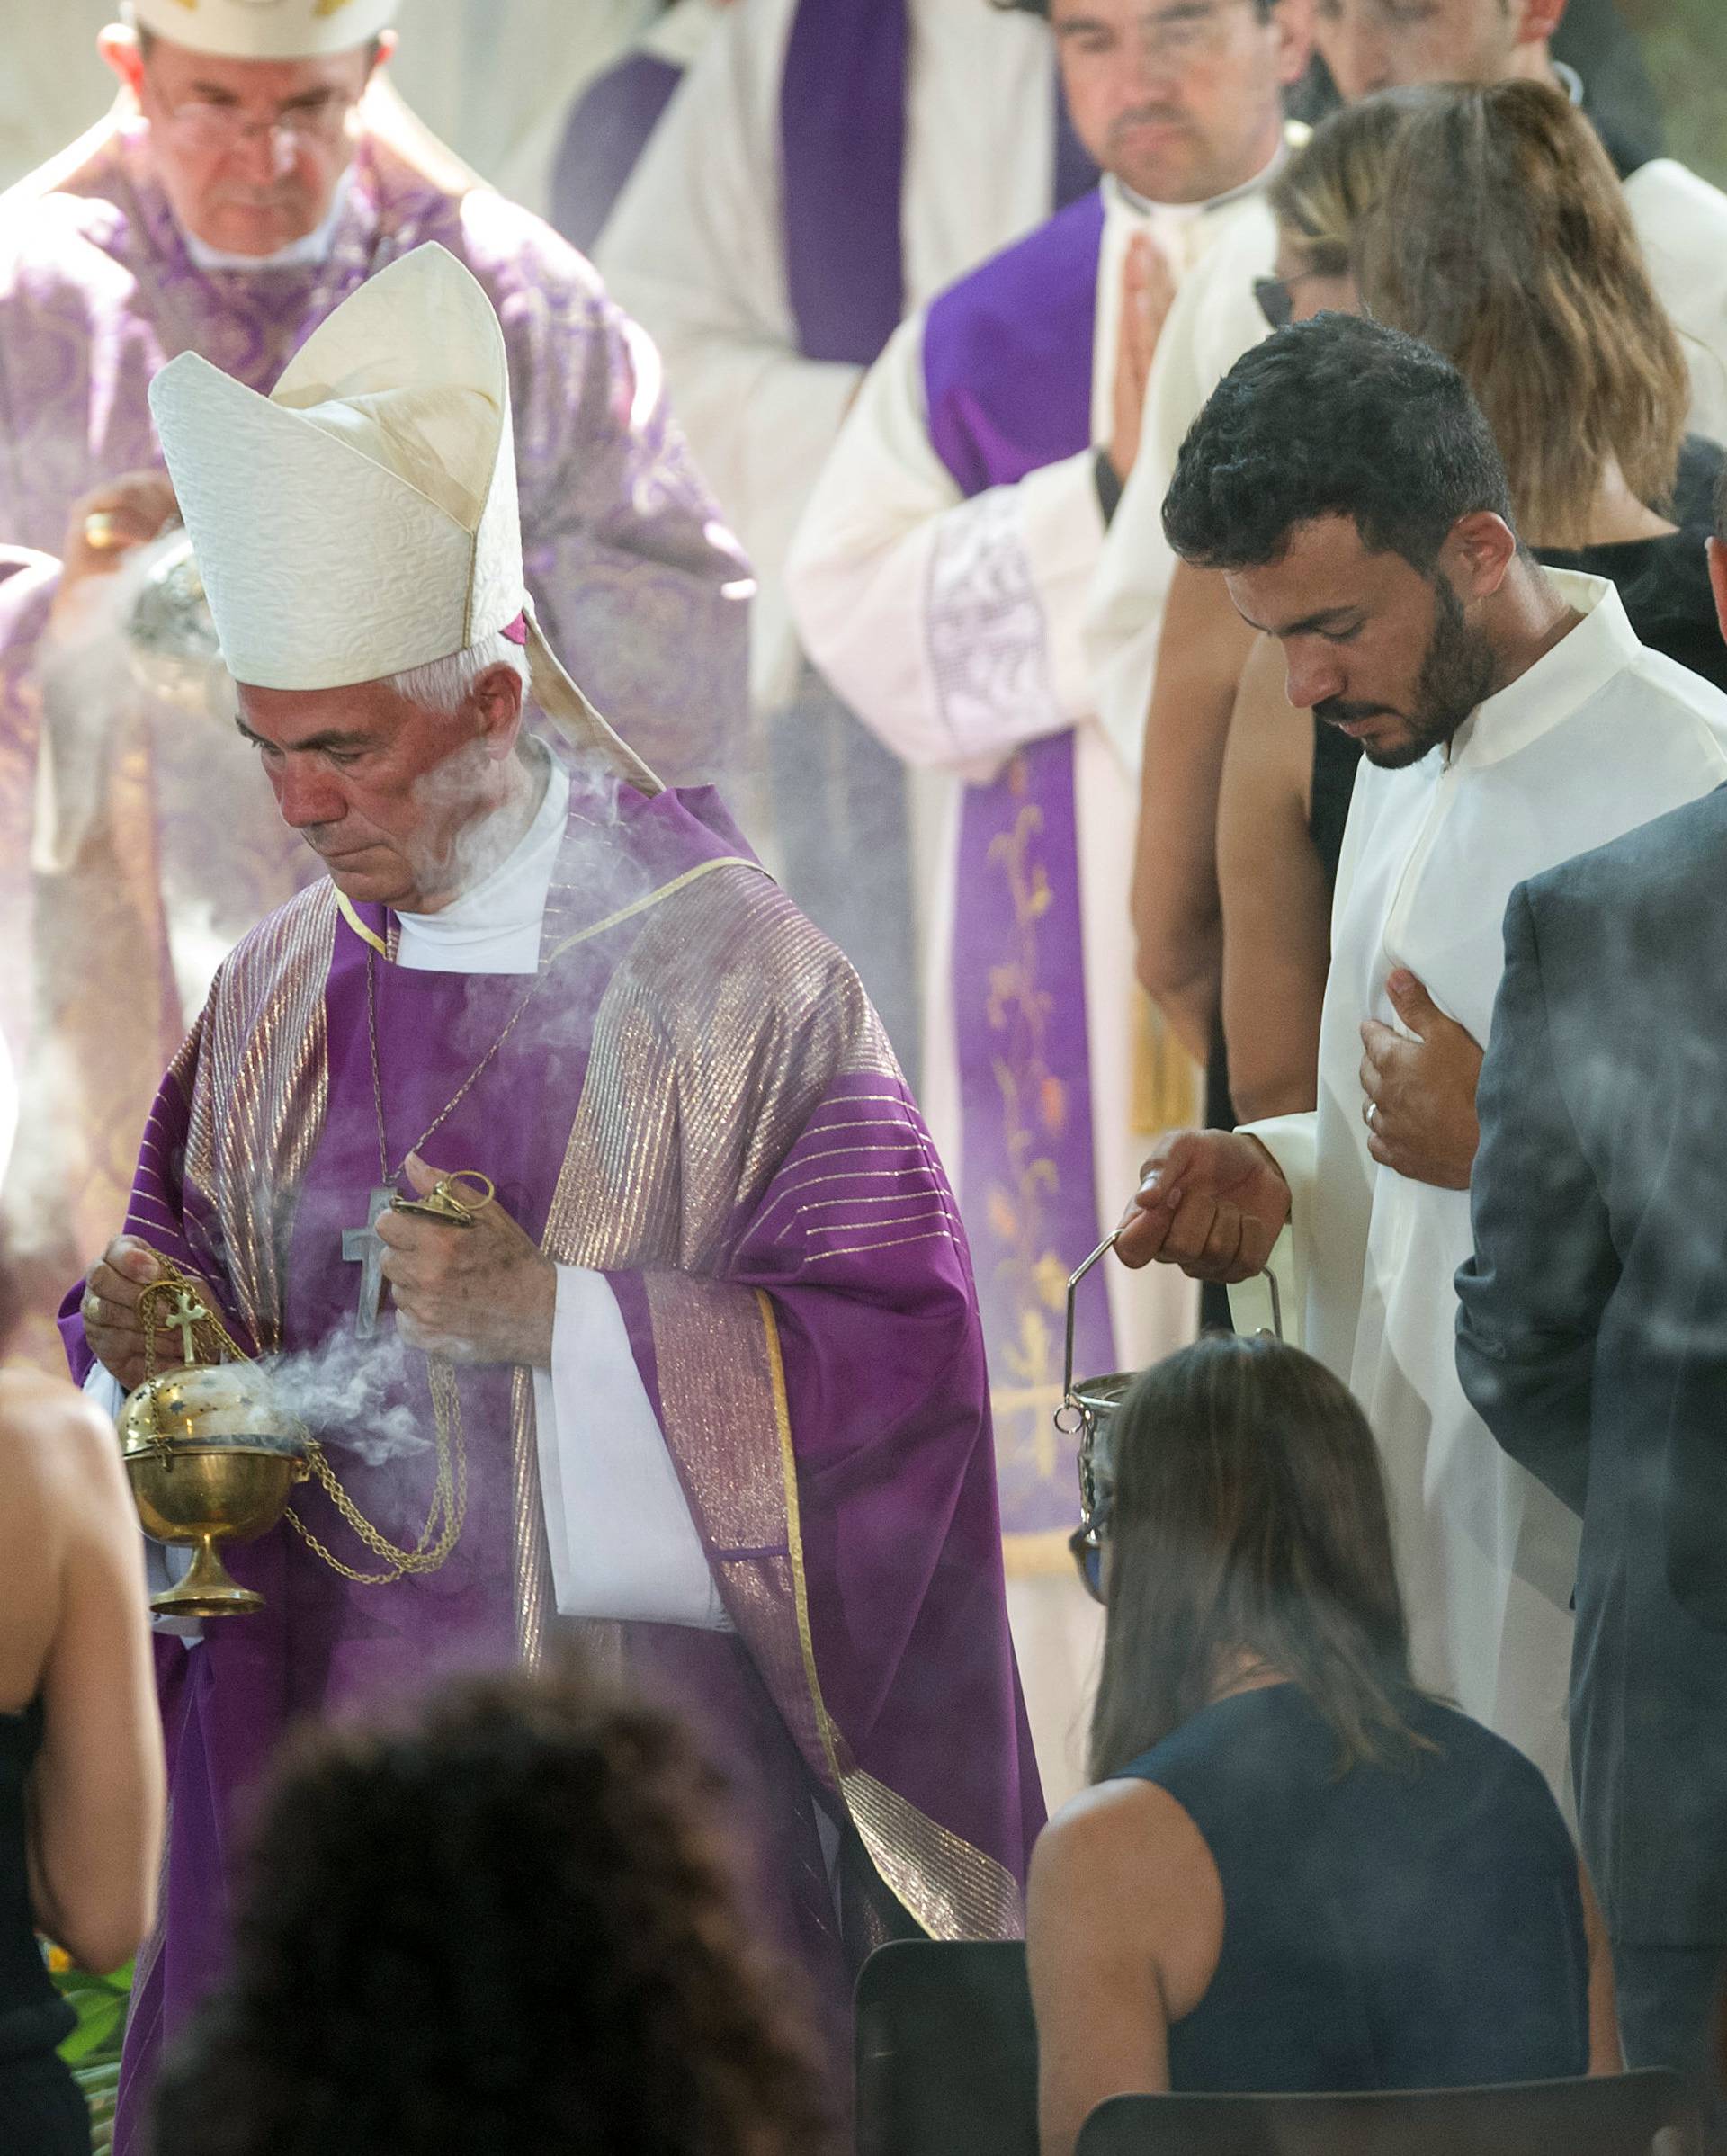 Giovanni D'Ercole, bishop of Ascoli Piceno, spreads incense during a funeral service for victims of the earthquake inside a gym, Italy